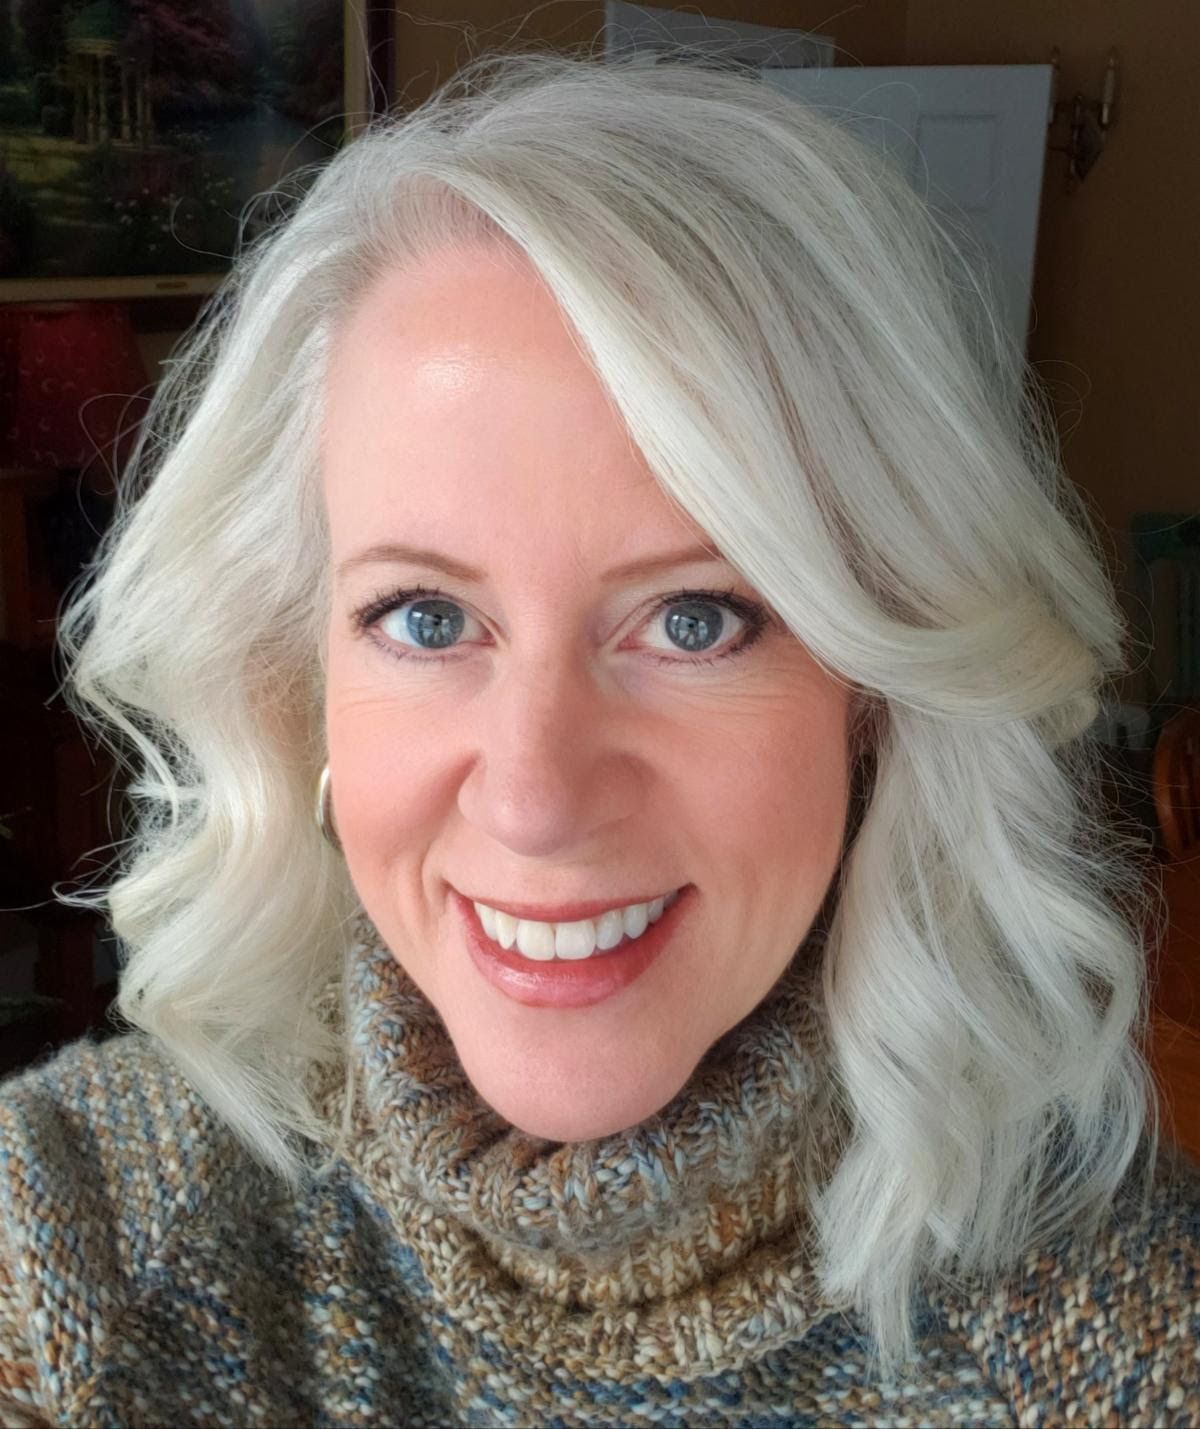 Tara Lodi is the 2020 President of the Silver Valley Chamber and current rehab program Director at Mountain Valley of Cascadia.